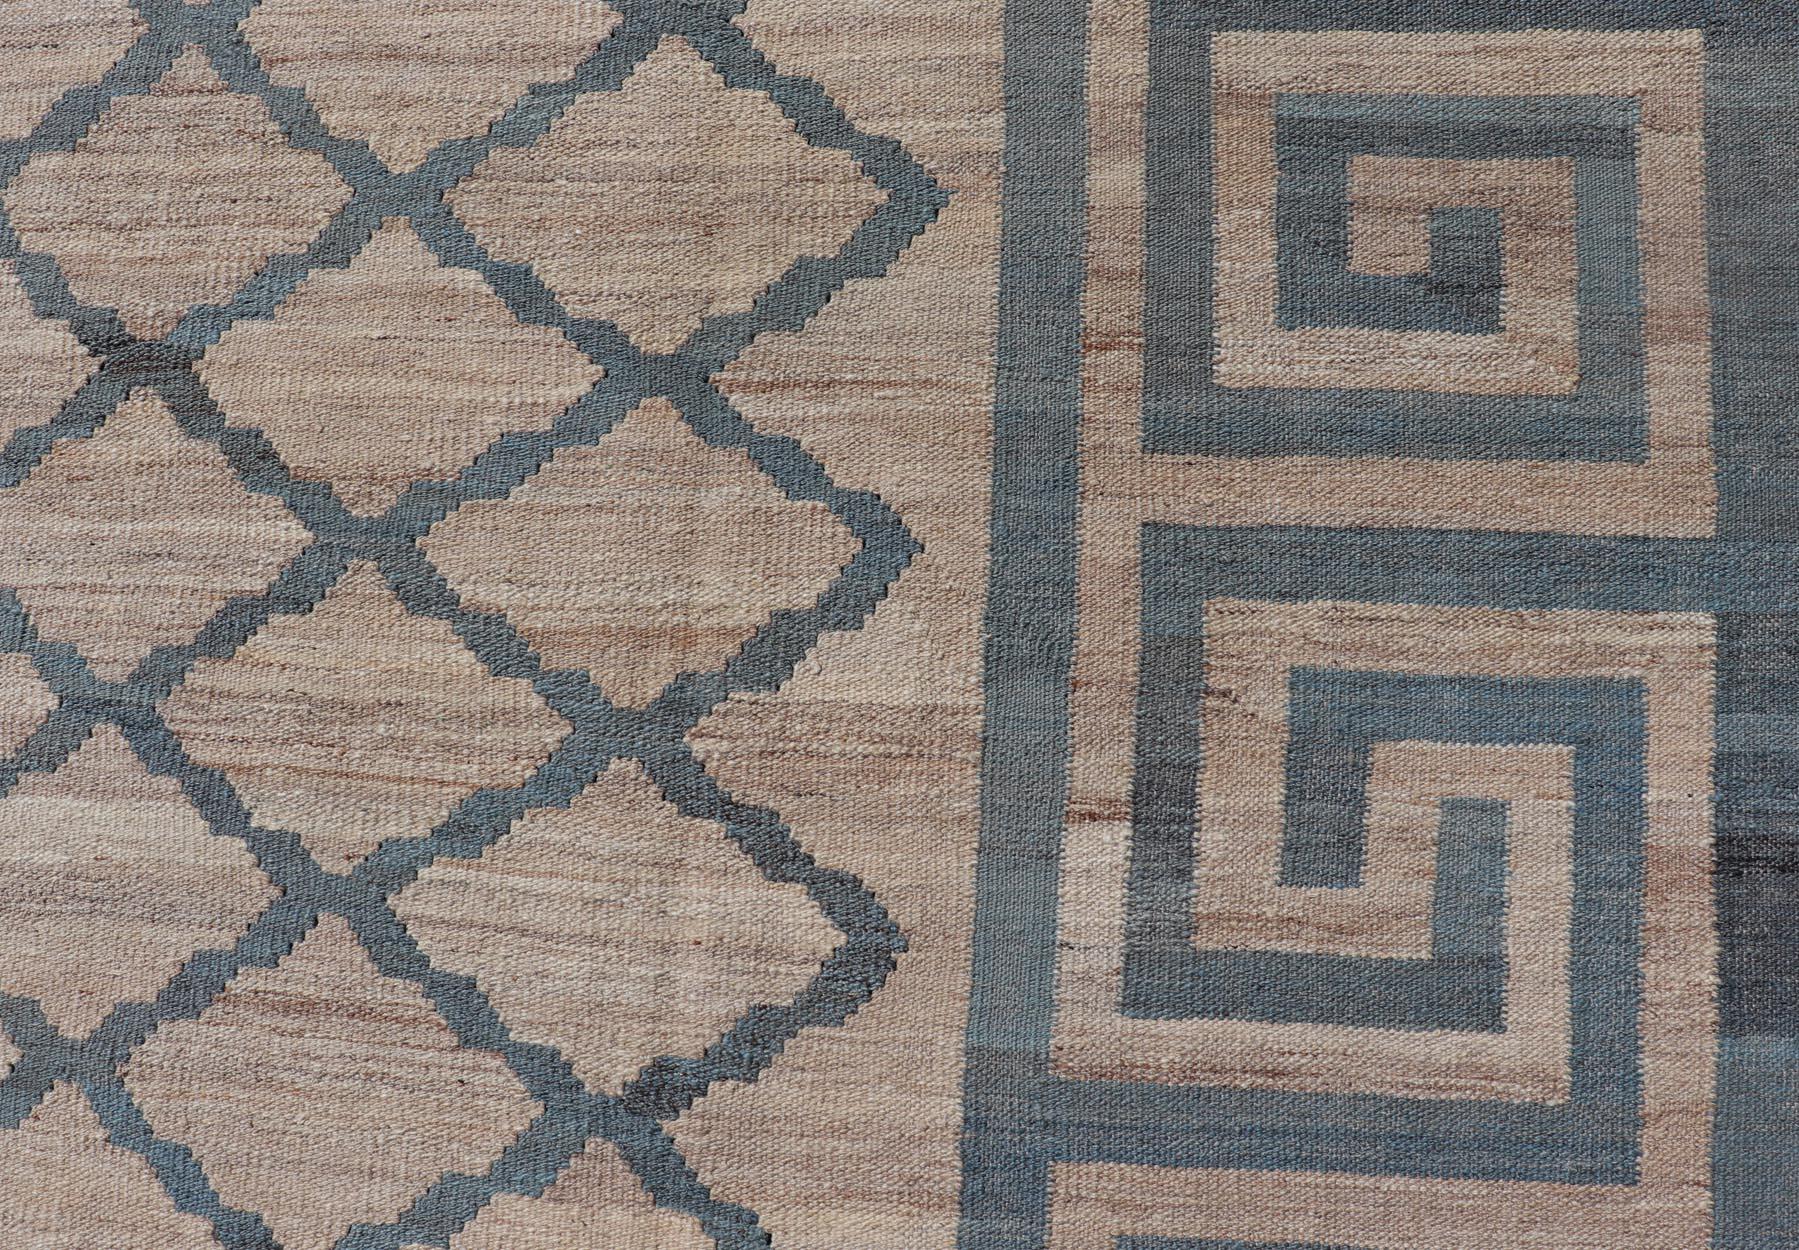 This flat-weave kilim has been hand-woven. The rug features a modern diamond design, enclosed within a Greek key border. The rug is rendered in blue, gray and earthy tones, making this rug a superb fit for a variety of classic, modern, casual and